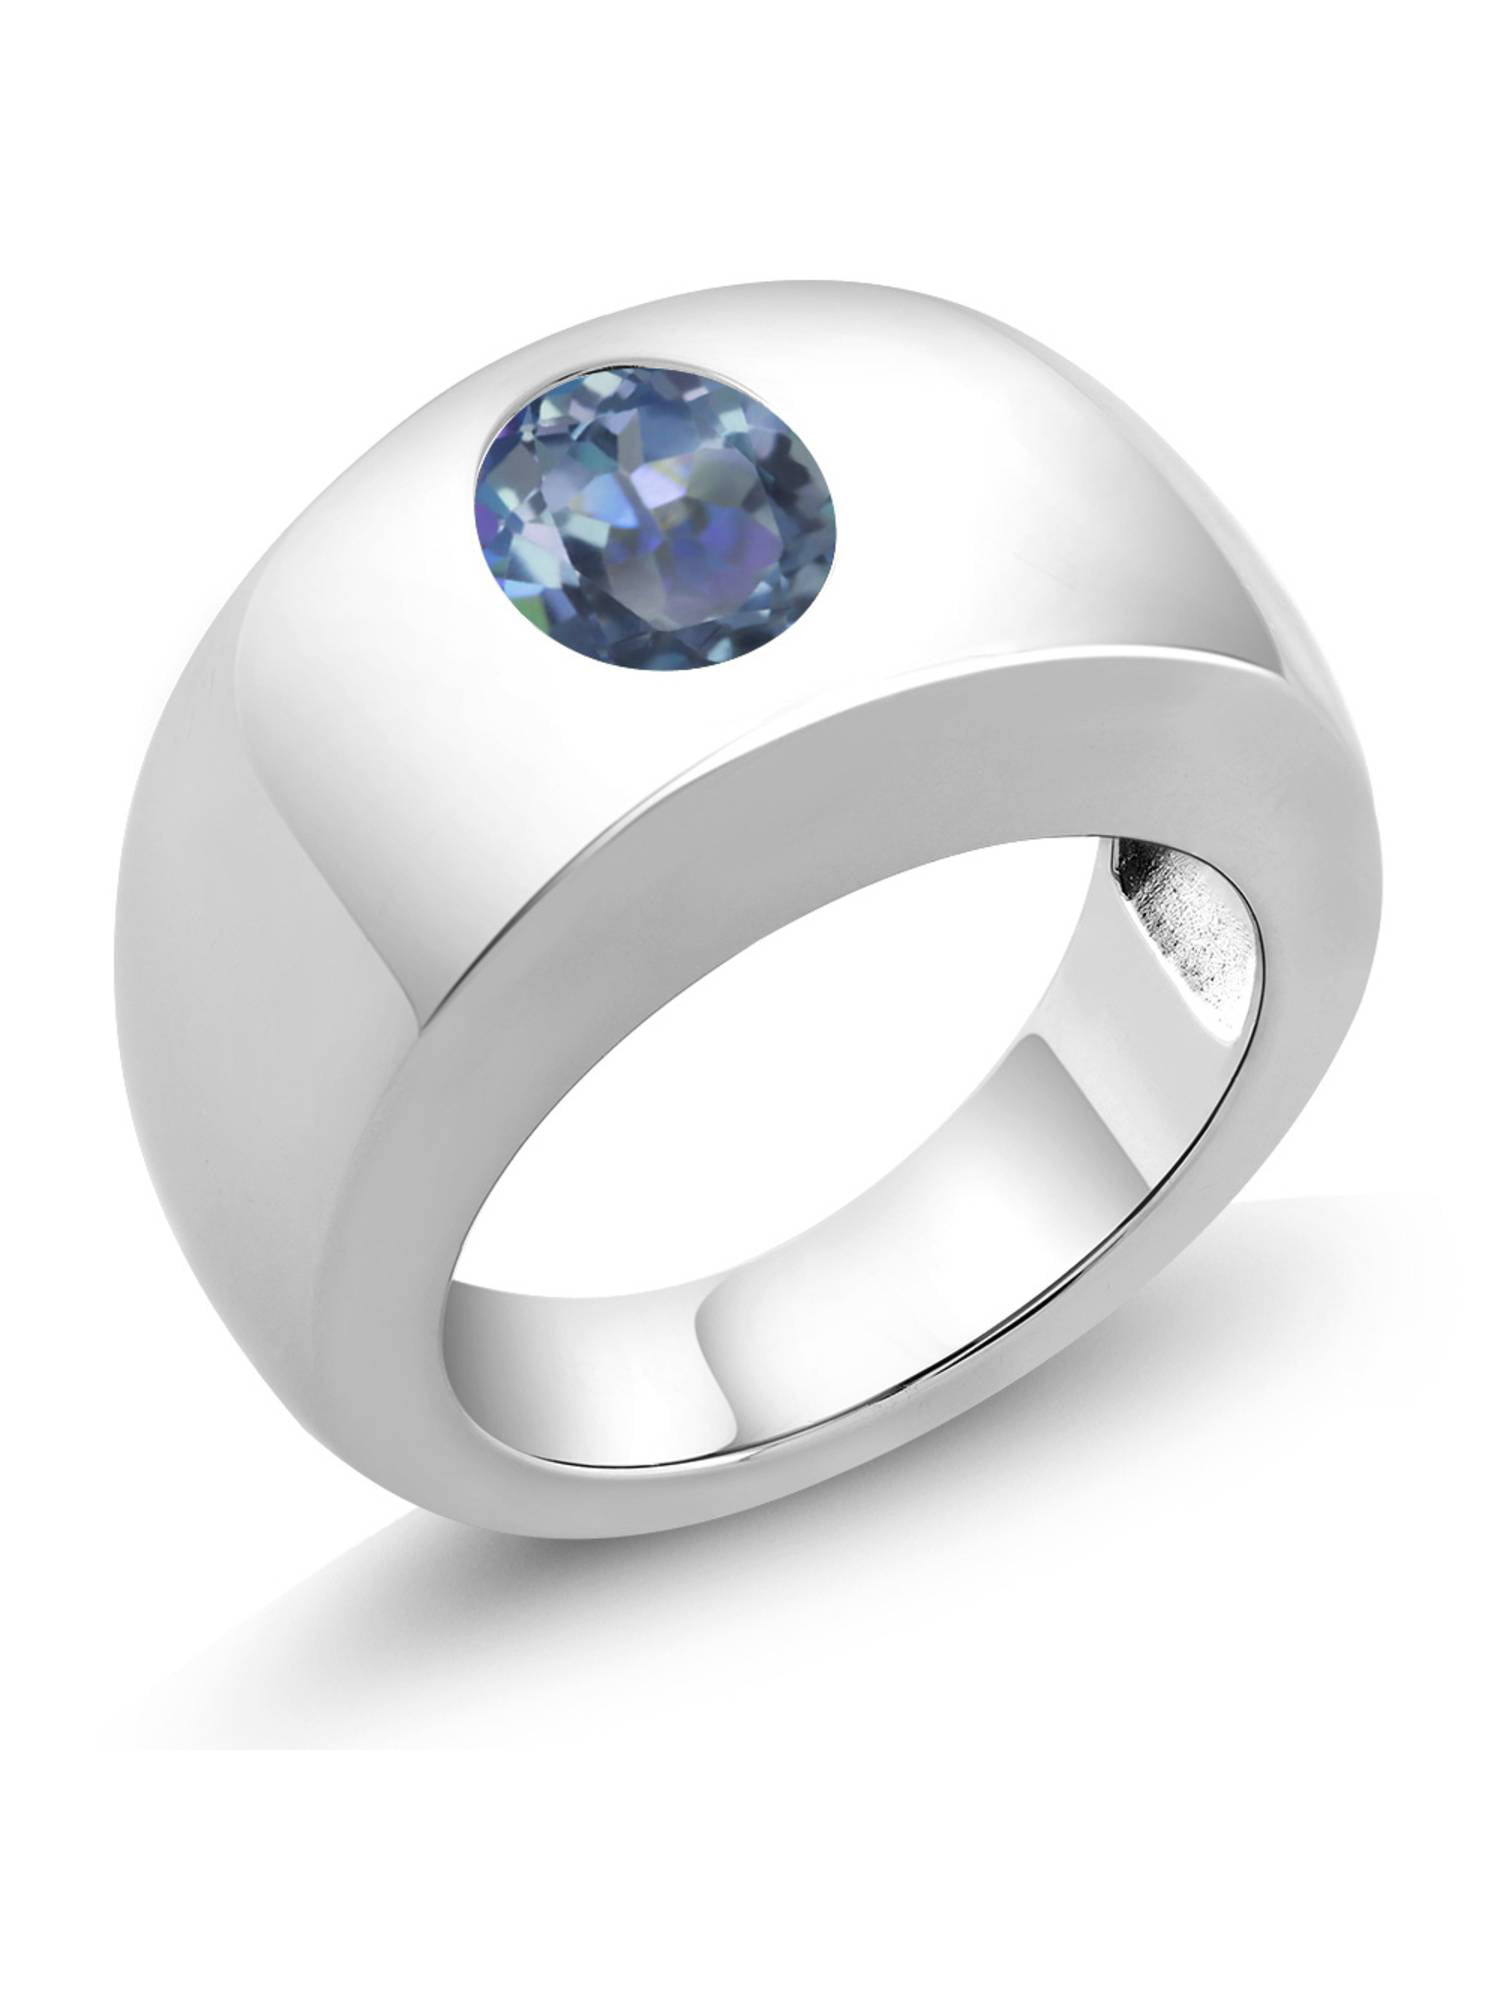 Sterling Silver Tanzanite and White Topaz Oval Halo Friendship Ring 